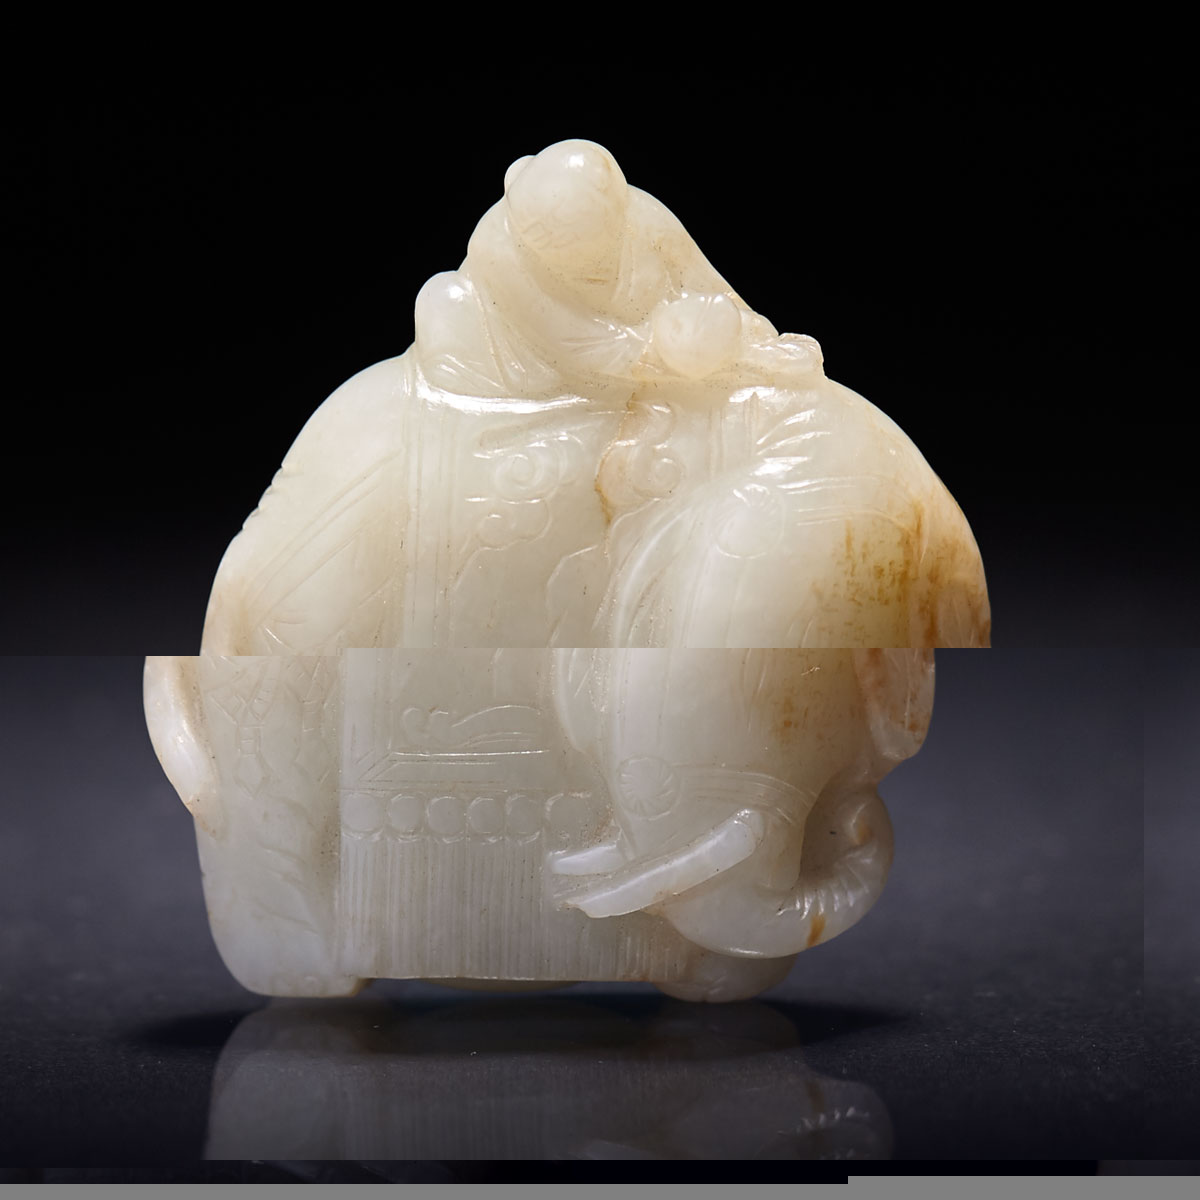 A Celadon White Jade 'Elephant and Boy' Carving, Qing Dynasty, 18th Century or Earlier